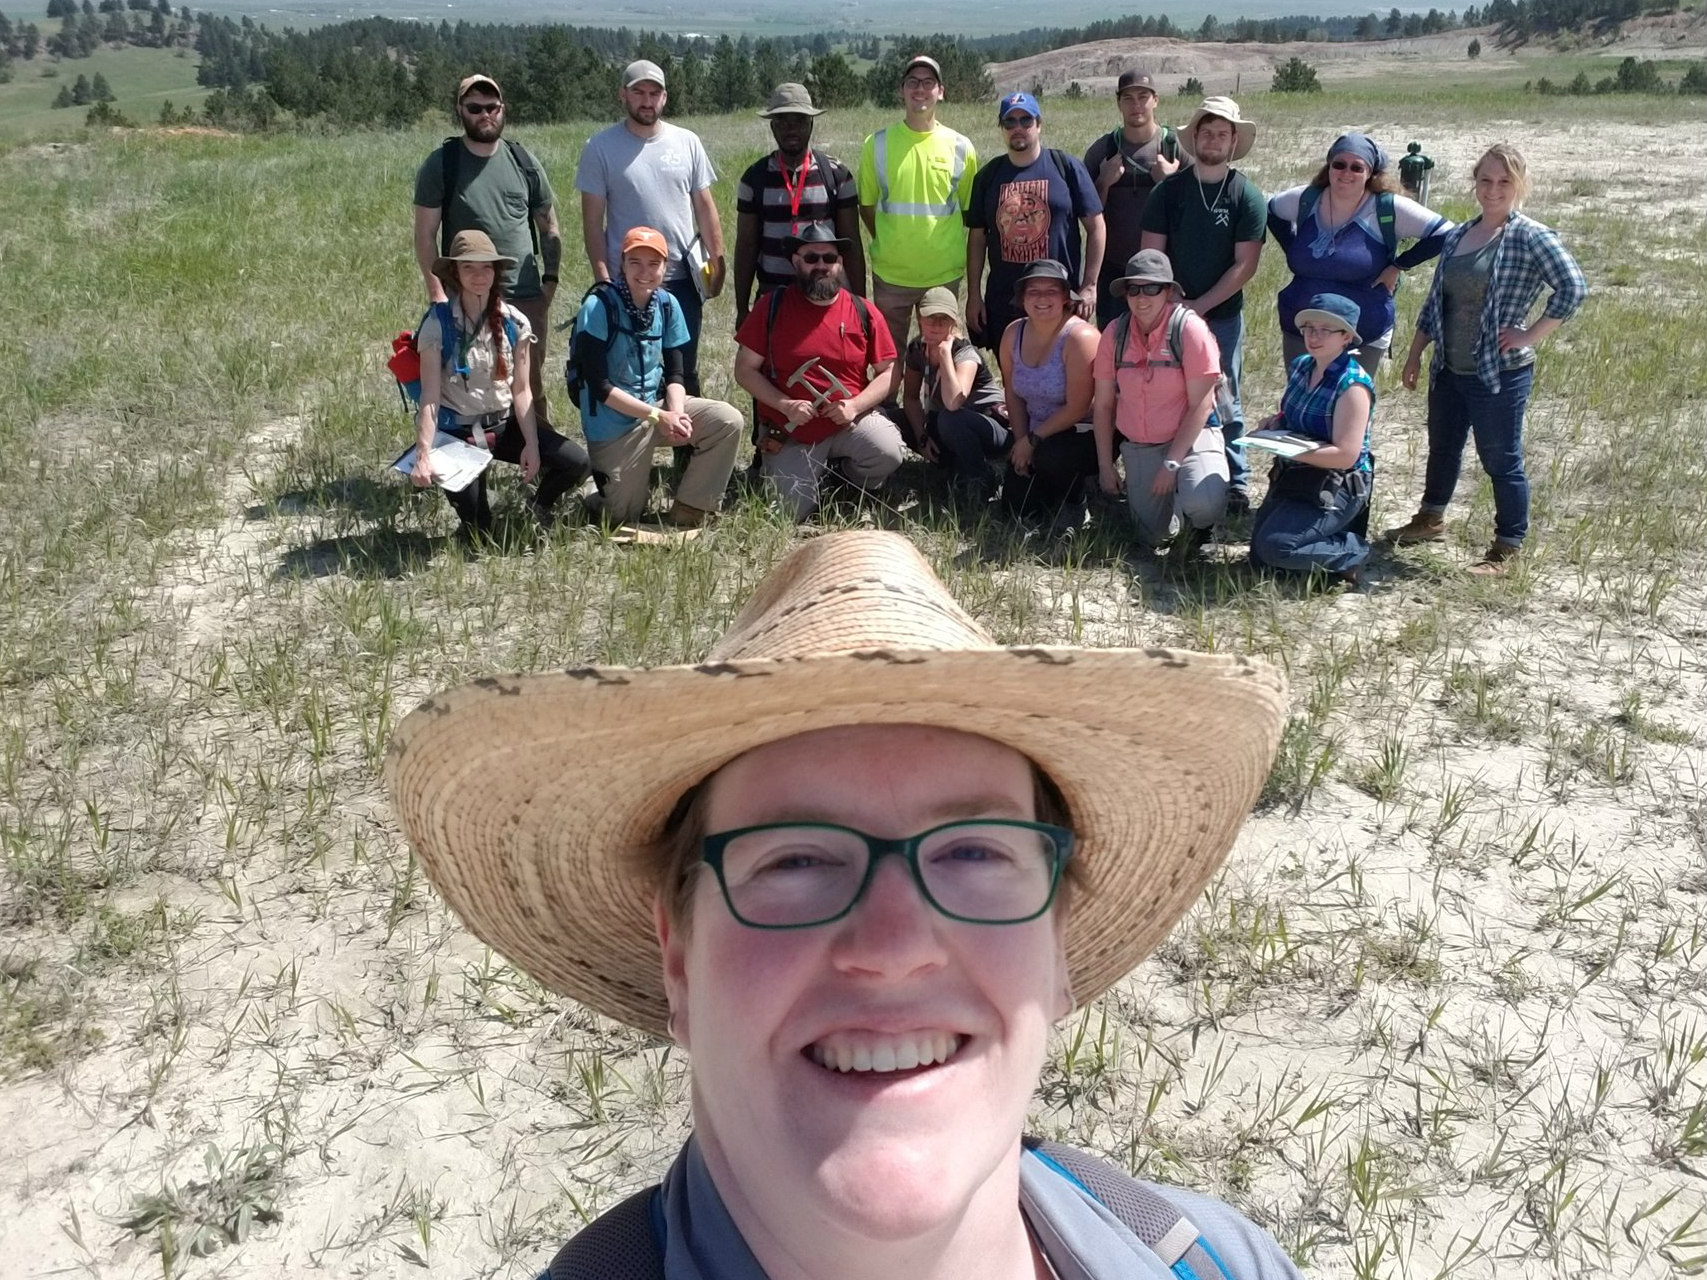 Dr. Graettinger taking a selfie with her students while at field camp